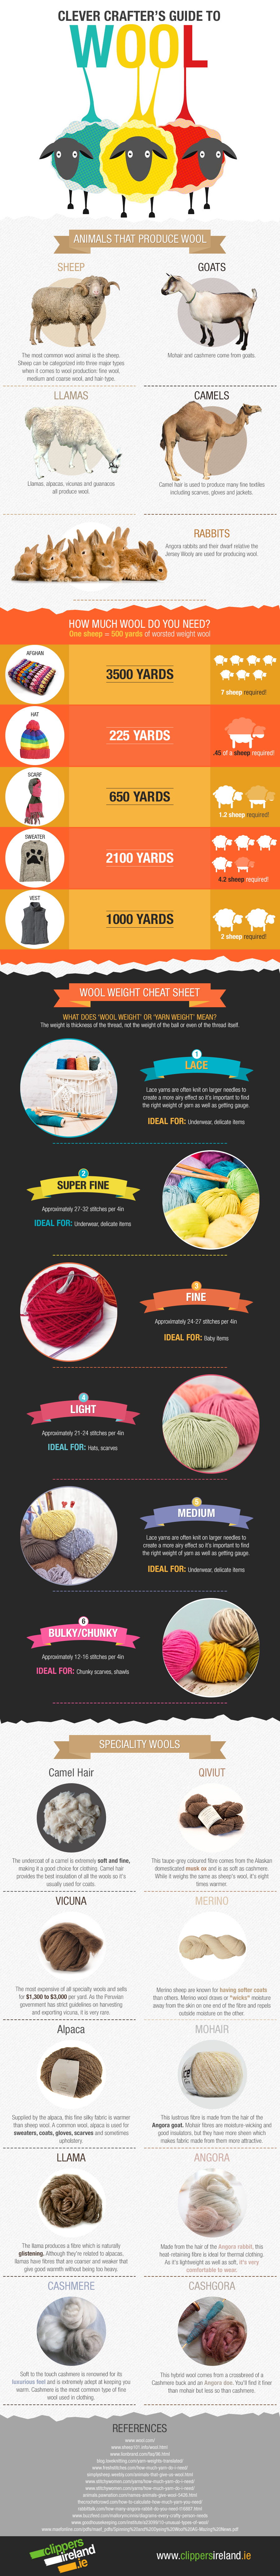 clever-crafters-guide-to-wool (1)